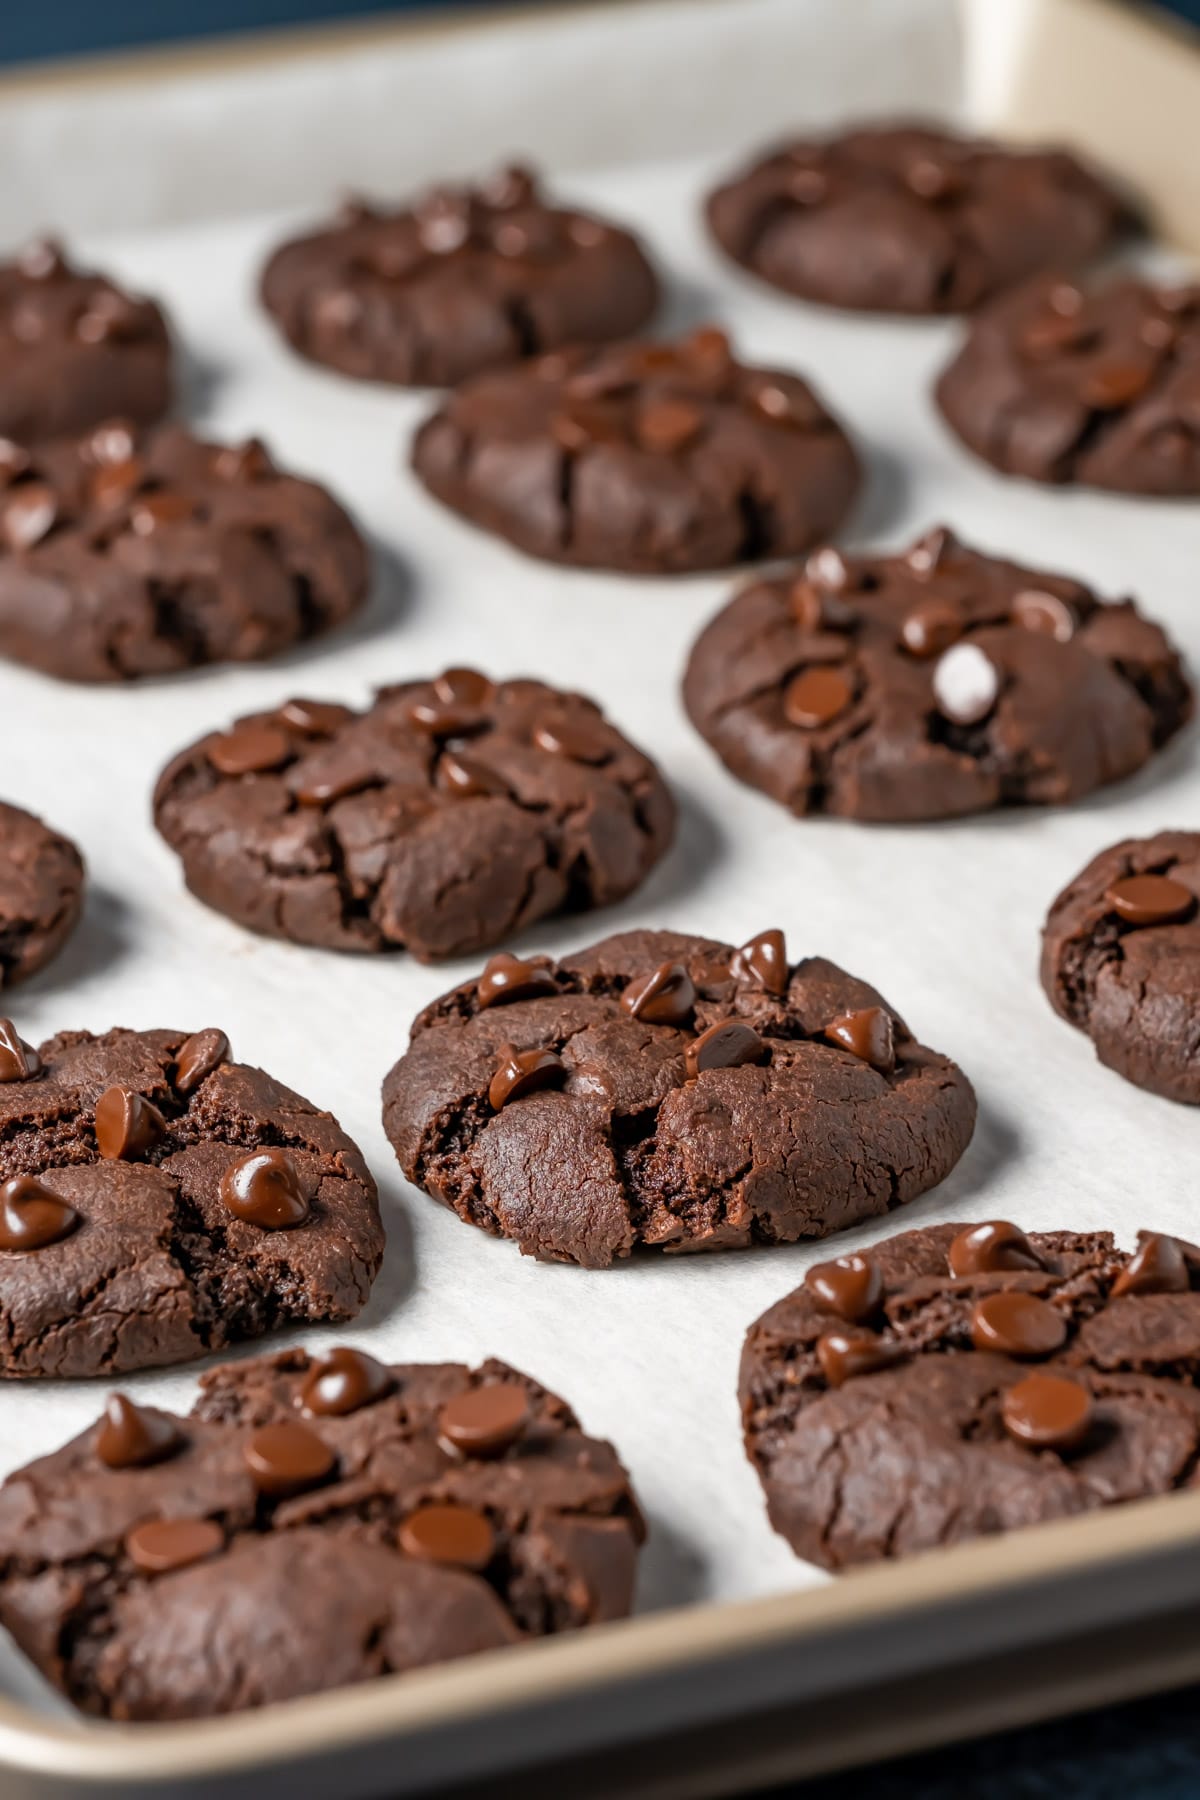 Vegan chocolate cookies on a parchment lined baking tray.